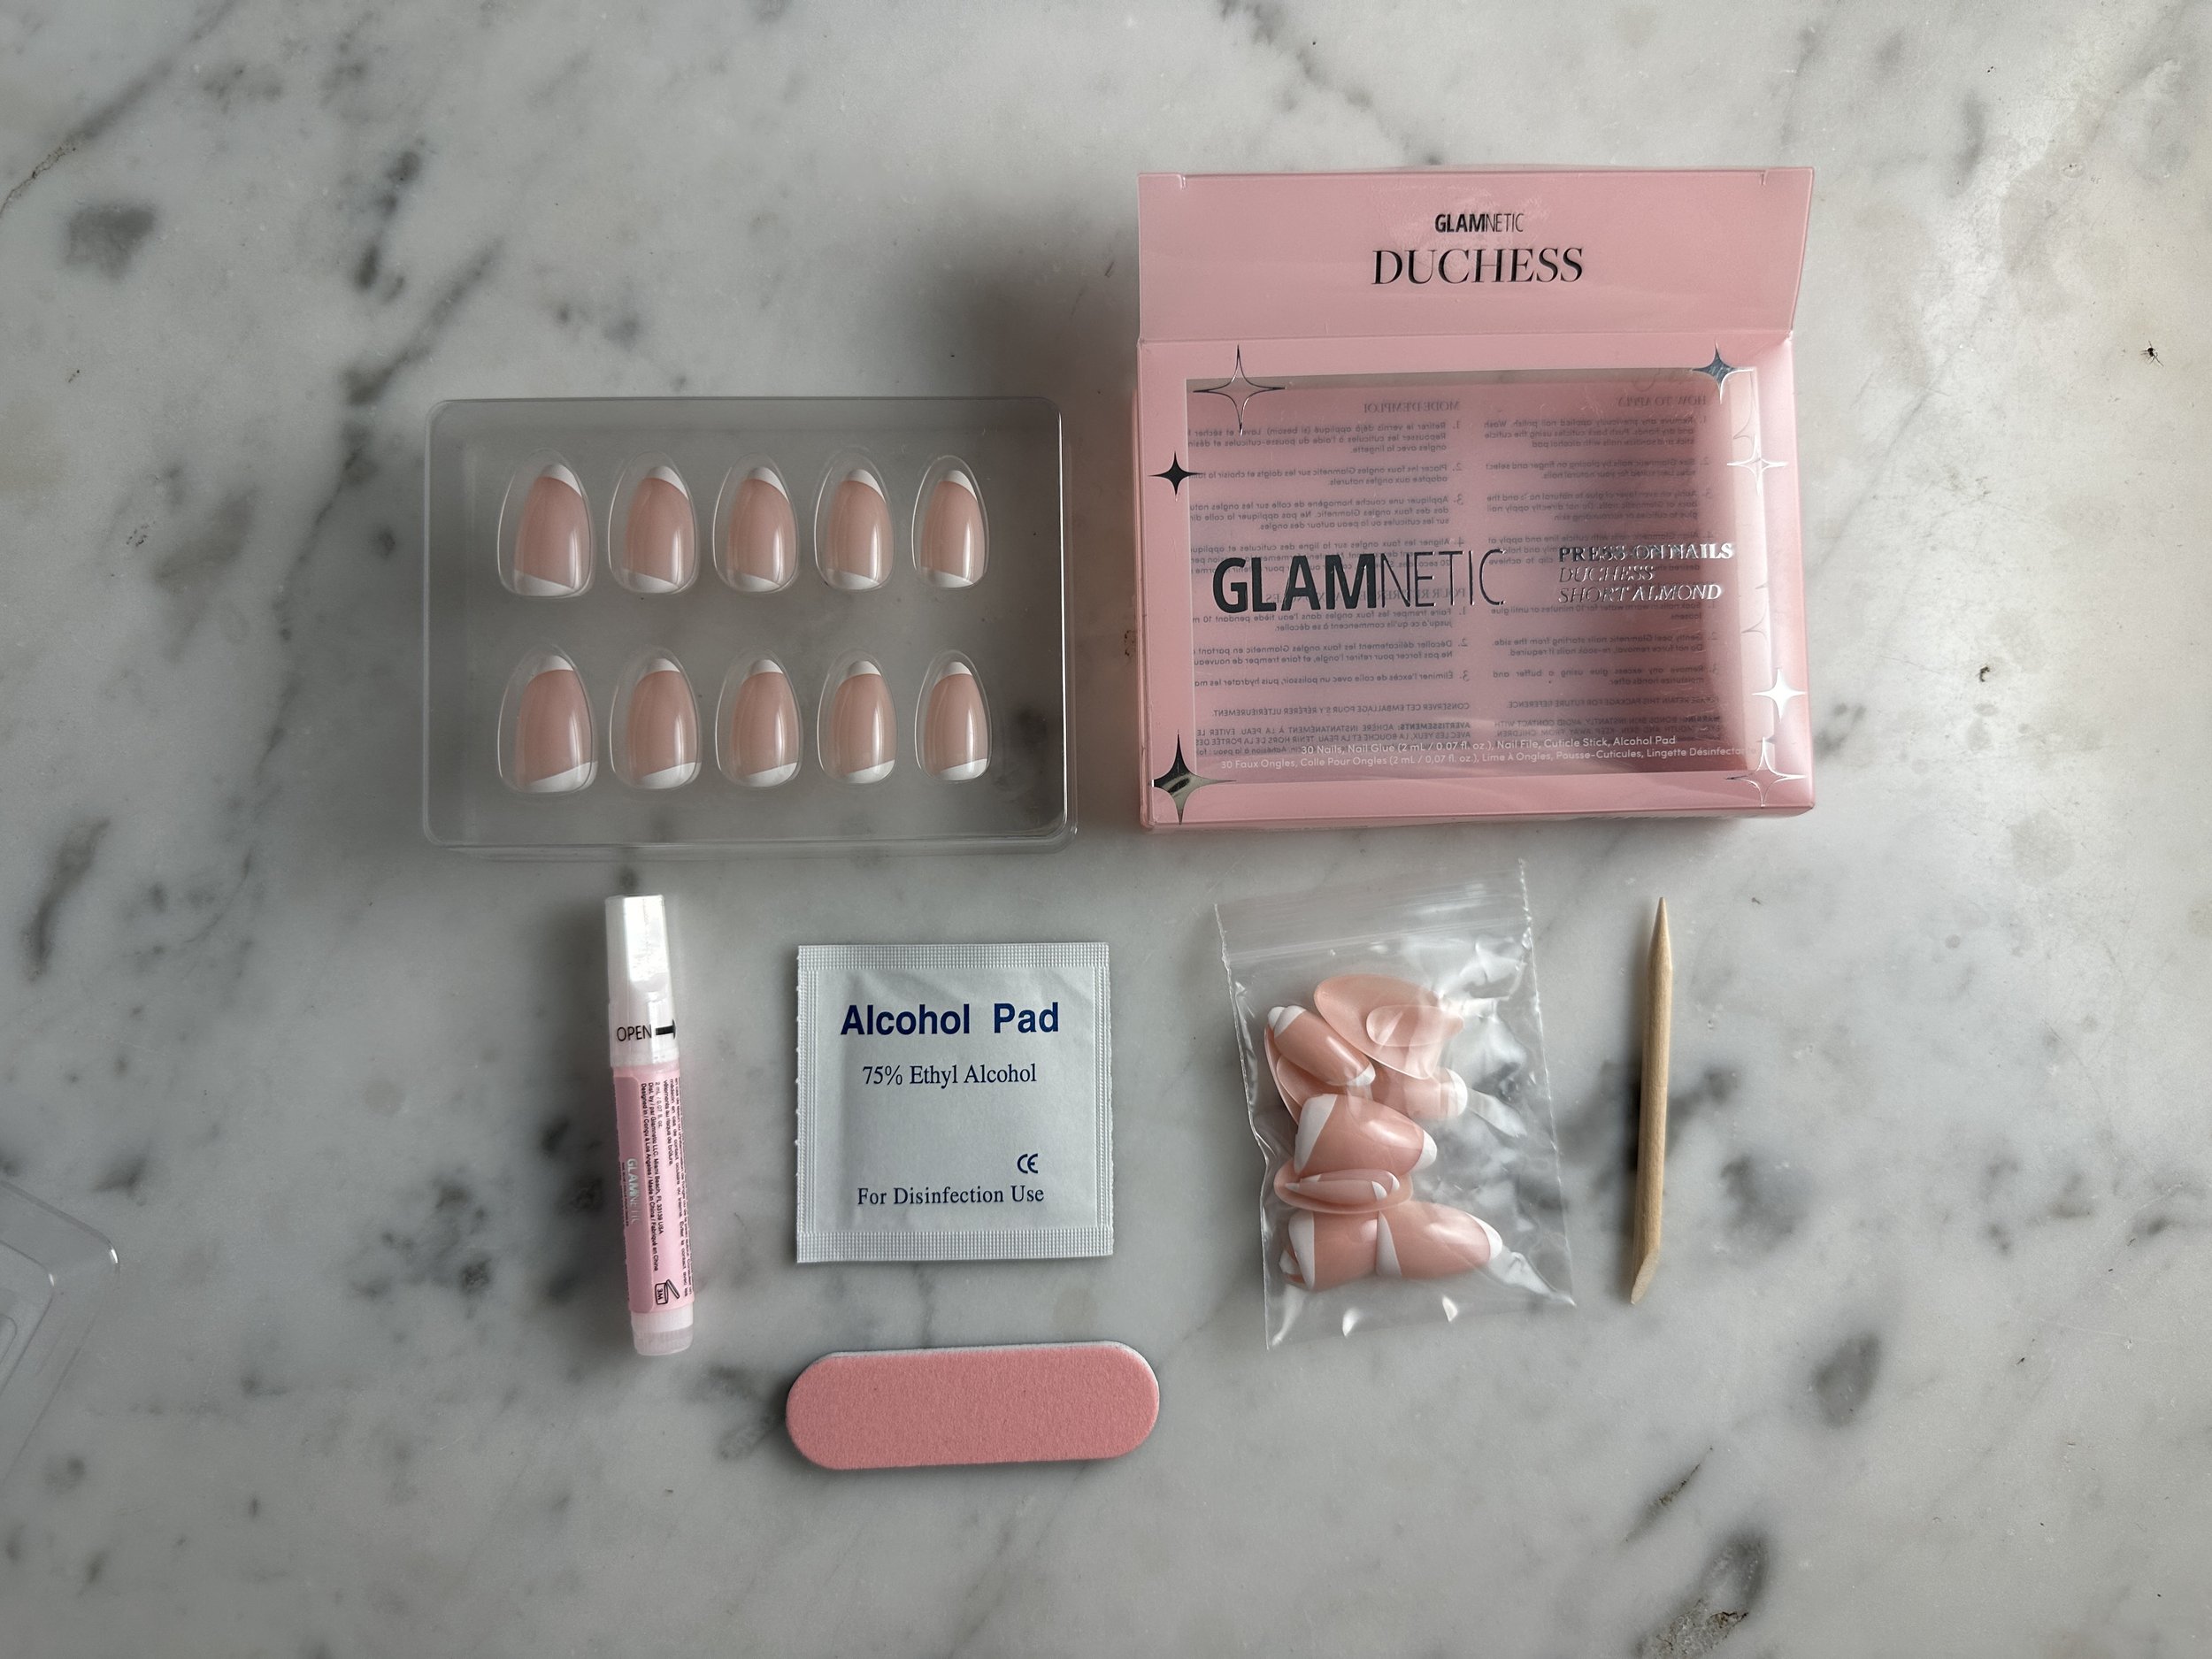 Duchess nail kit from Glamnetic